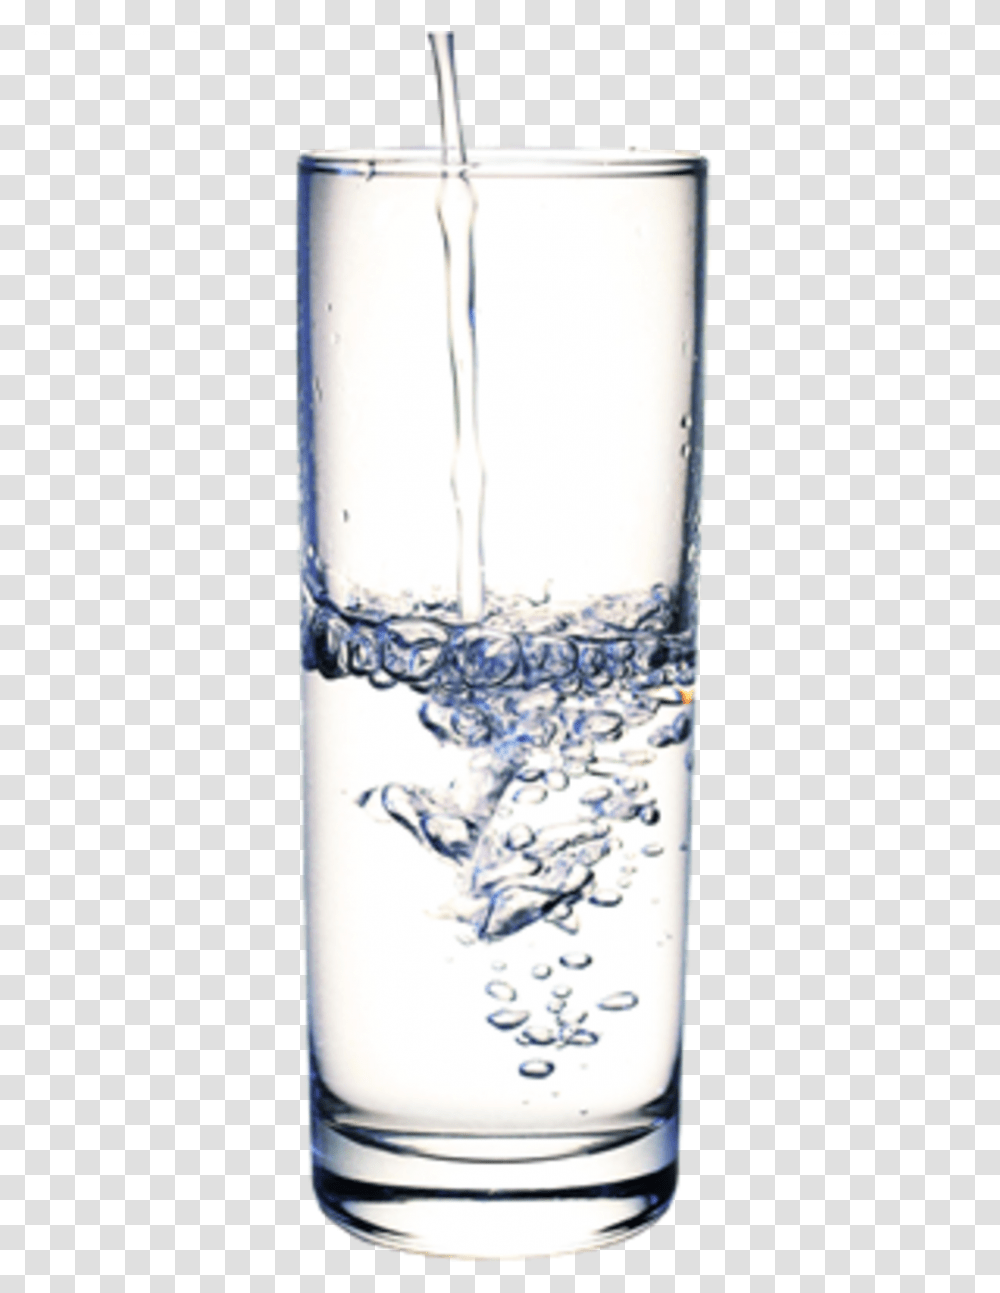 Glass Drinking Water Wastewater Water Drinking Glass, Beverage, Bottle, Wine Glass, Alcohol Transparent Png